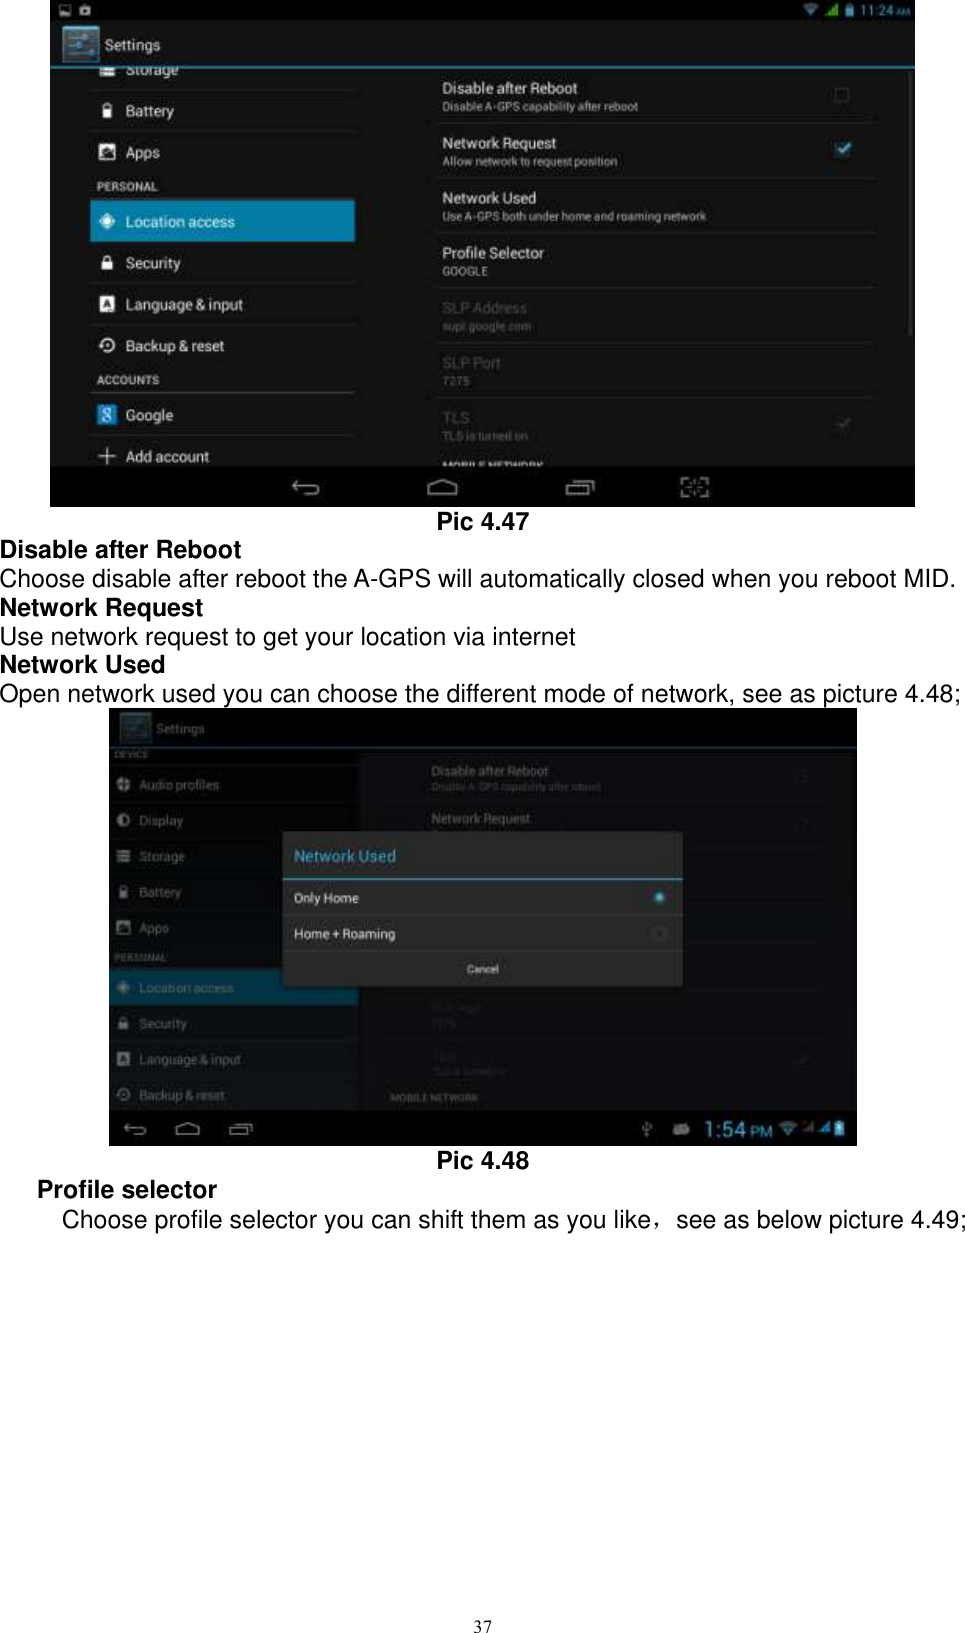      37  Pic 4.47 Disable after Reboot Choose disable after reboot the A-GPS will automatically closed when you reboot MID. Network Request Use network request to get your location via internet Network Used Open network used you can choose the different mode of network, see as picture 4.48;  Pic 4.48 Profile selector       Choose profile selector you can shift them as you like，see as below picture 4.49; 